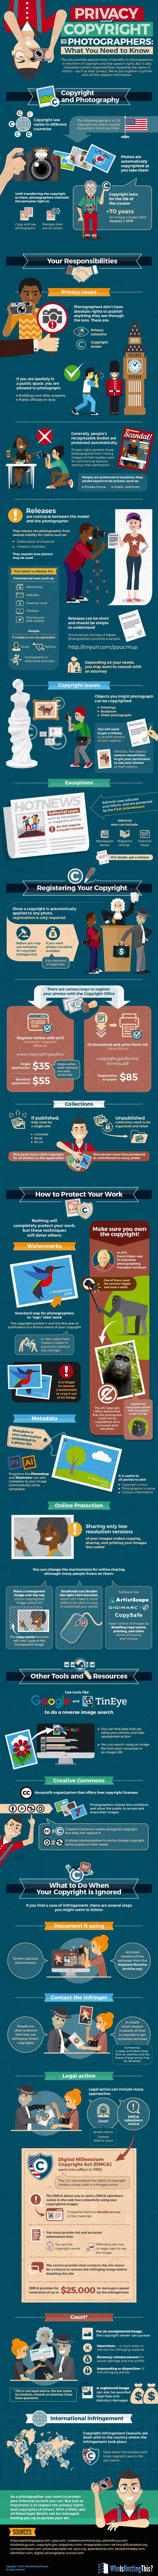 Copyright for Photographers: What Do You Need To Know? - #infographic